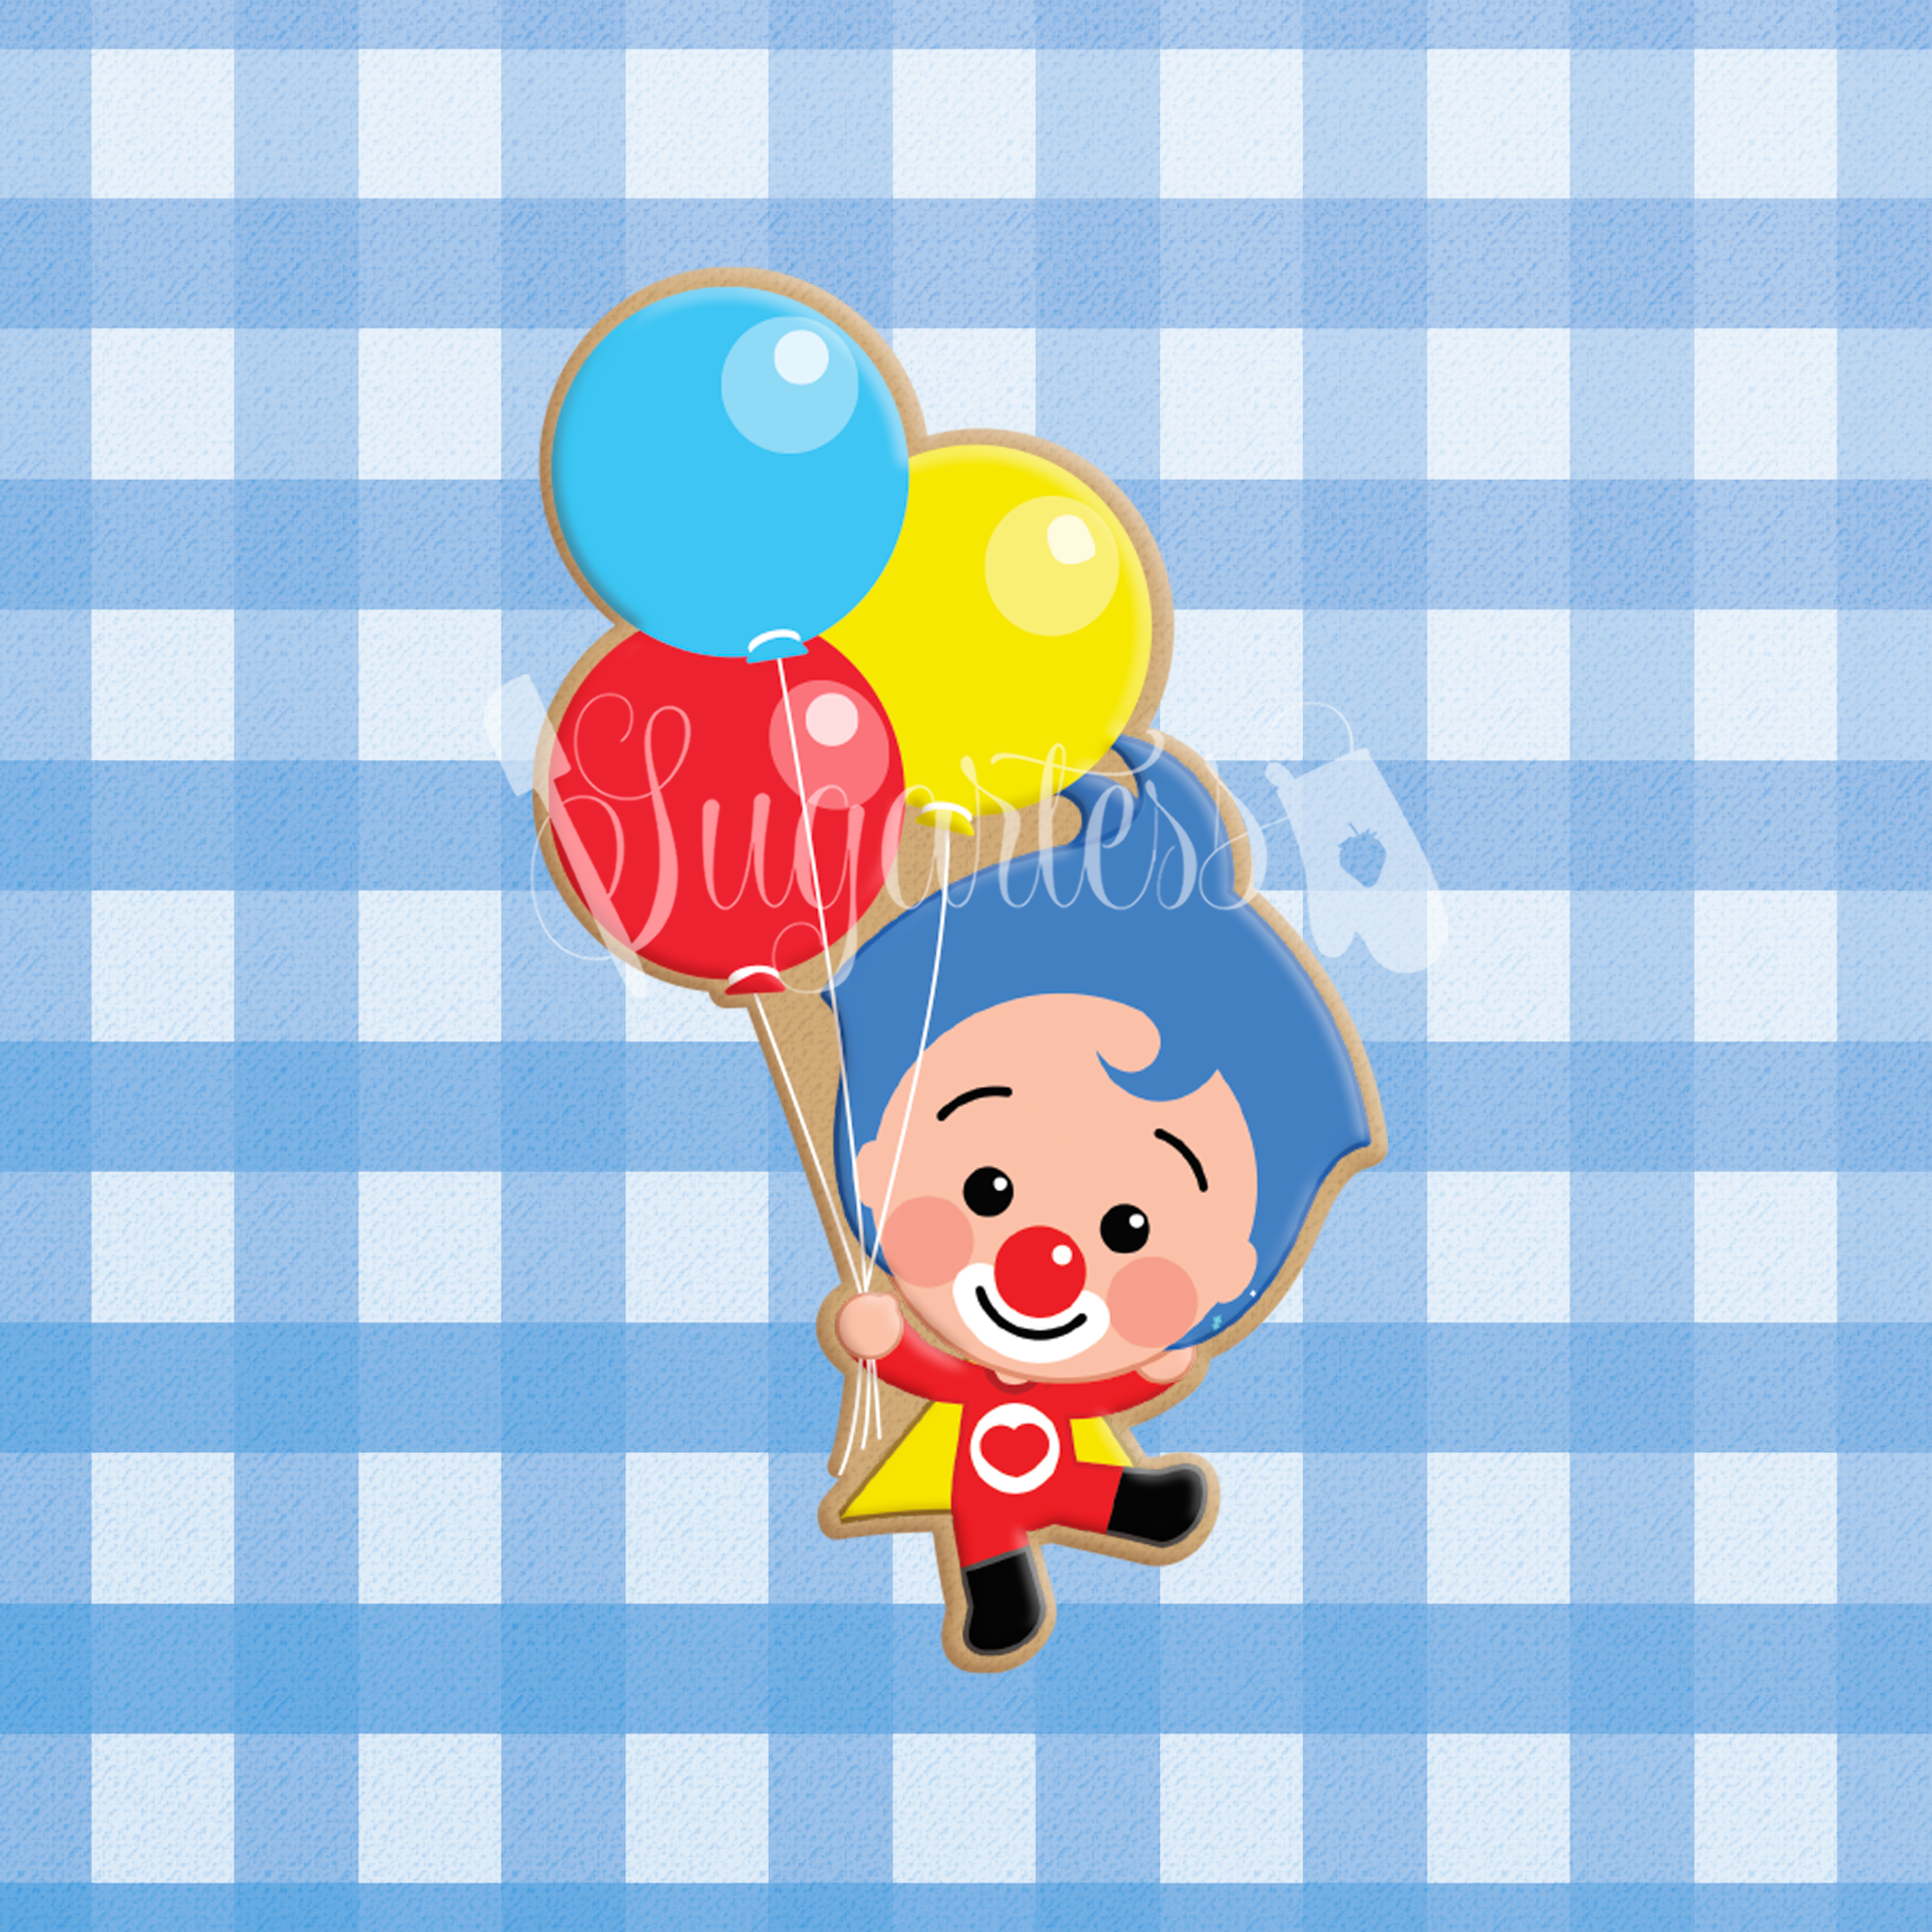 Plim Plim with Balloons Clown Character